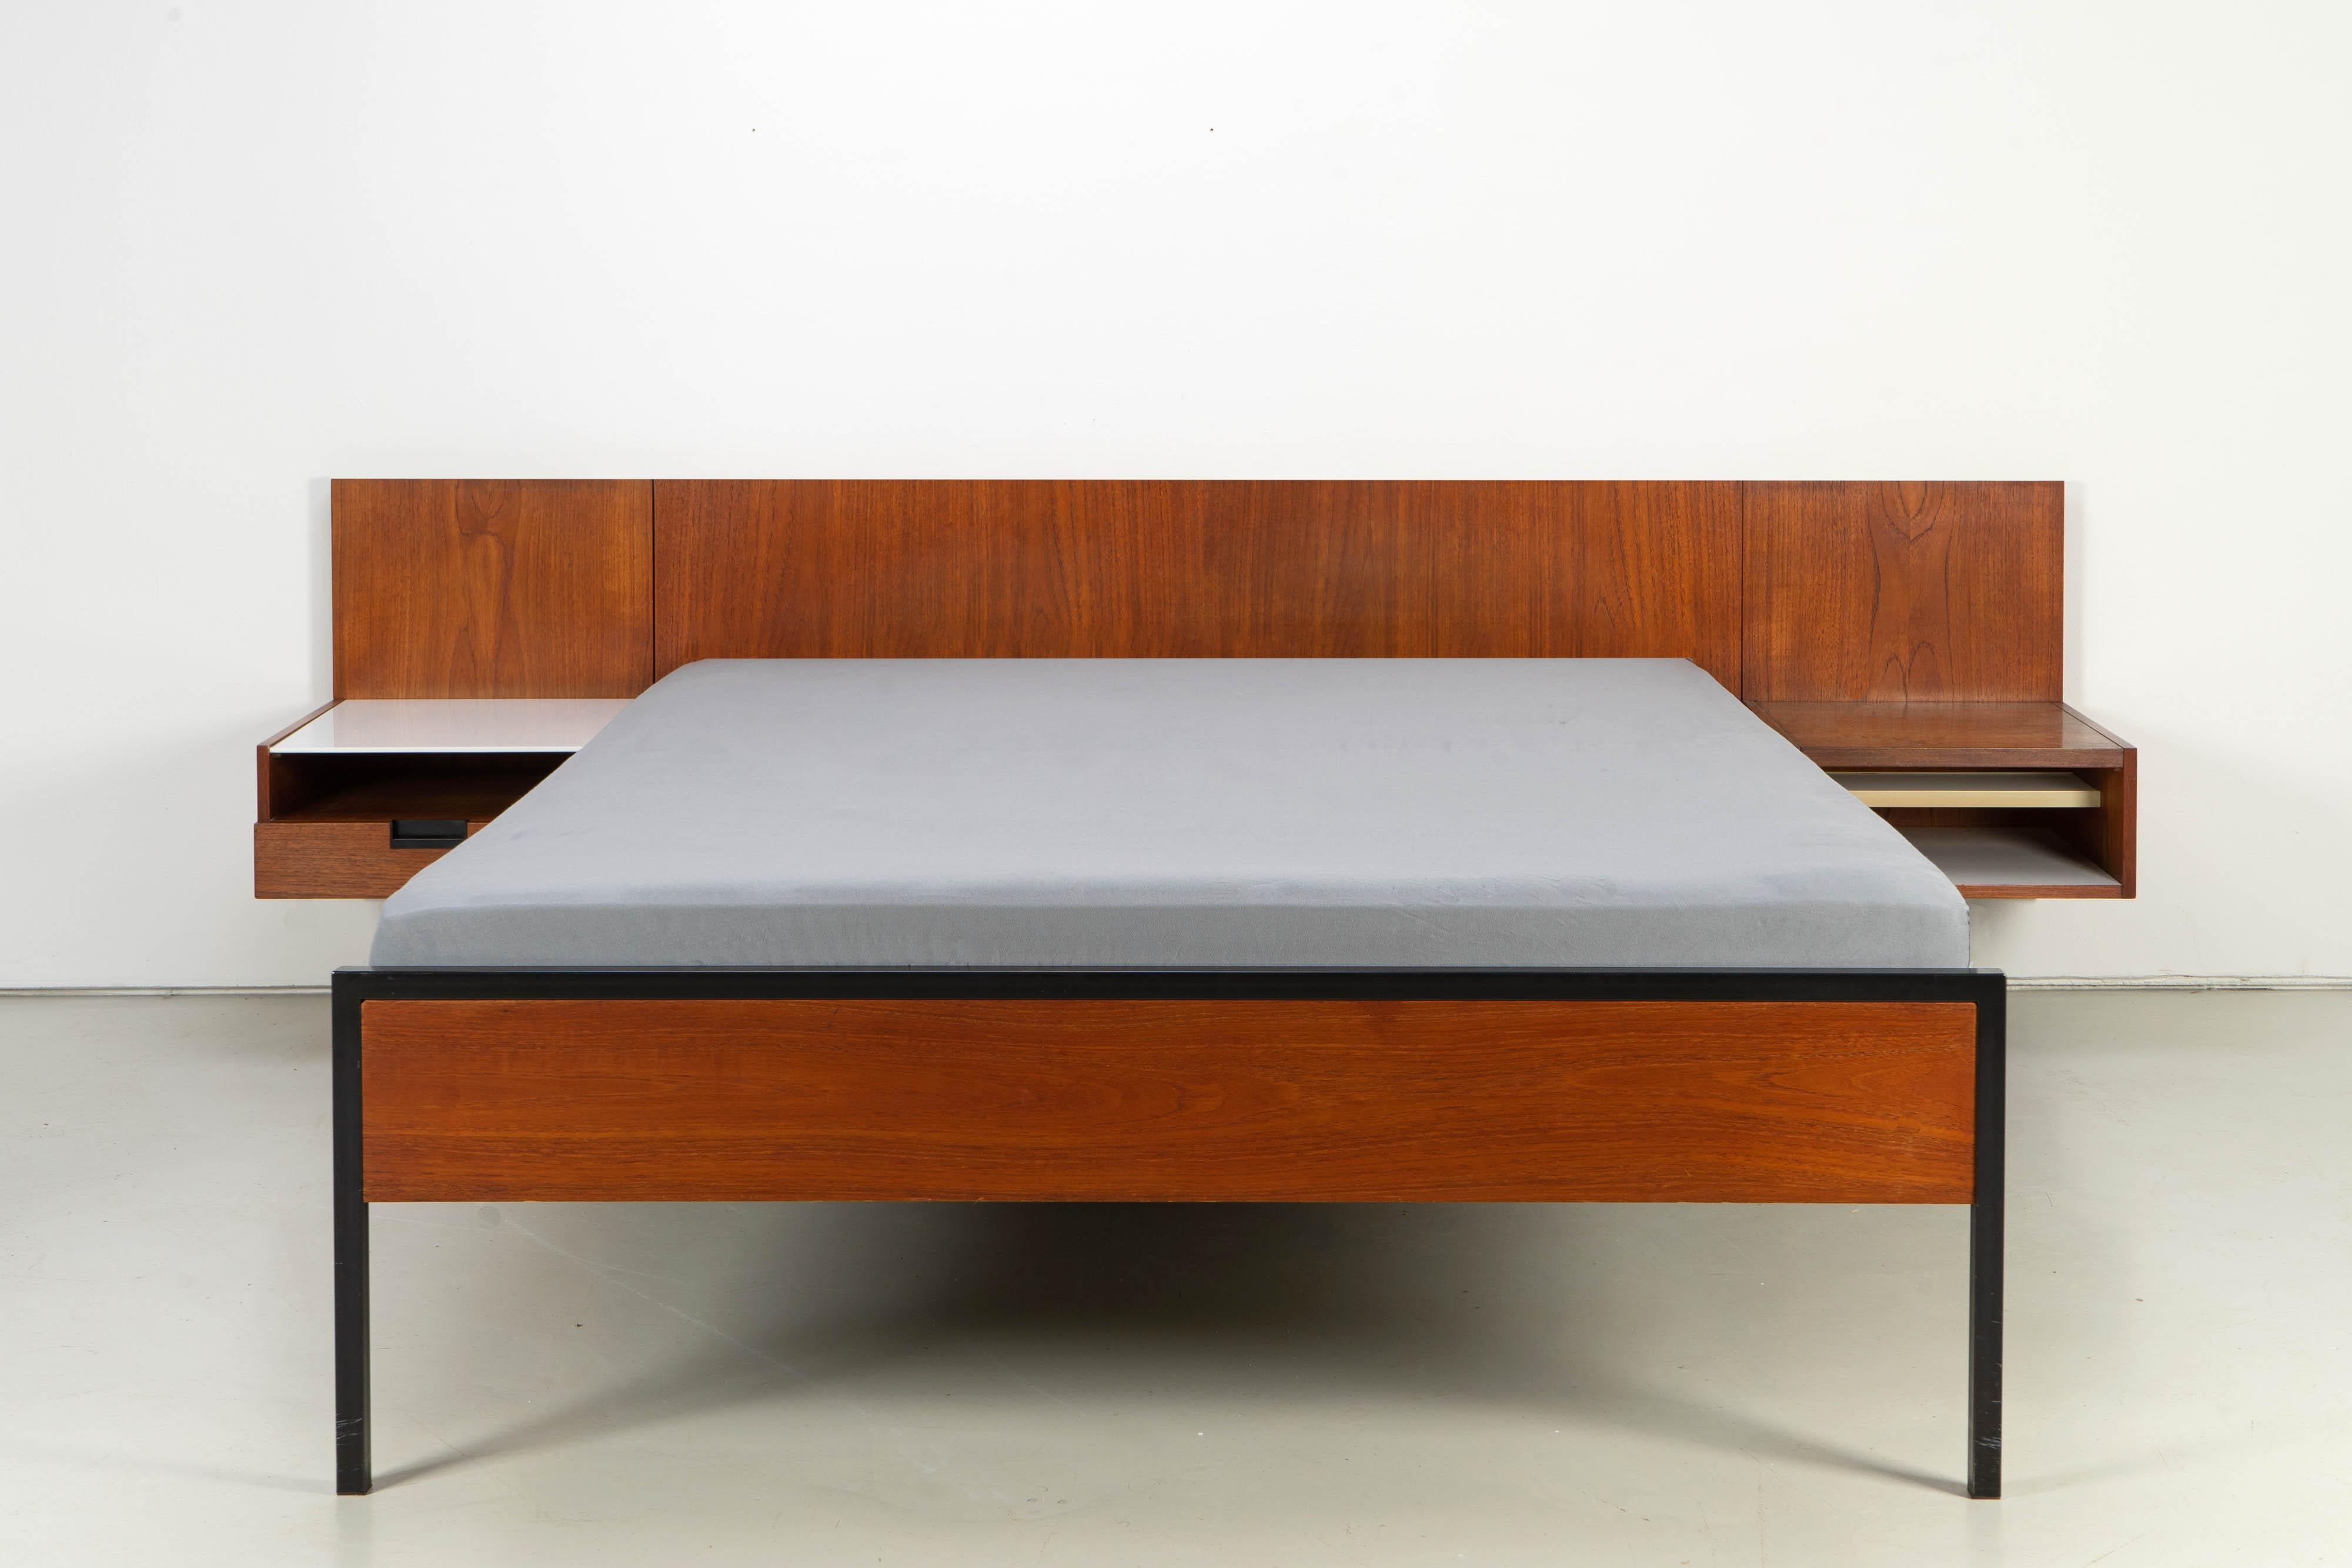 Rare vintage bed by Cees Braakman for Pastoe from the 1960s. This bed with headboard and two hanging bedside cabinets consists of a steel frame and wooden surfaces veneered with teak. One bedside cabinet has a drawer and a shelf made of white glass,